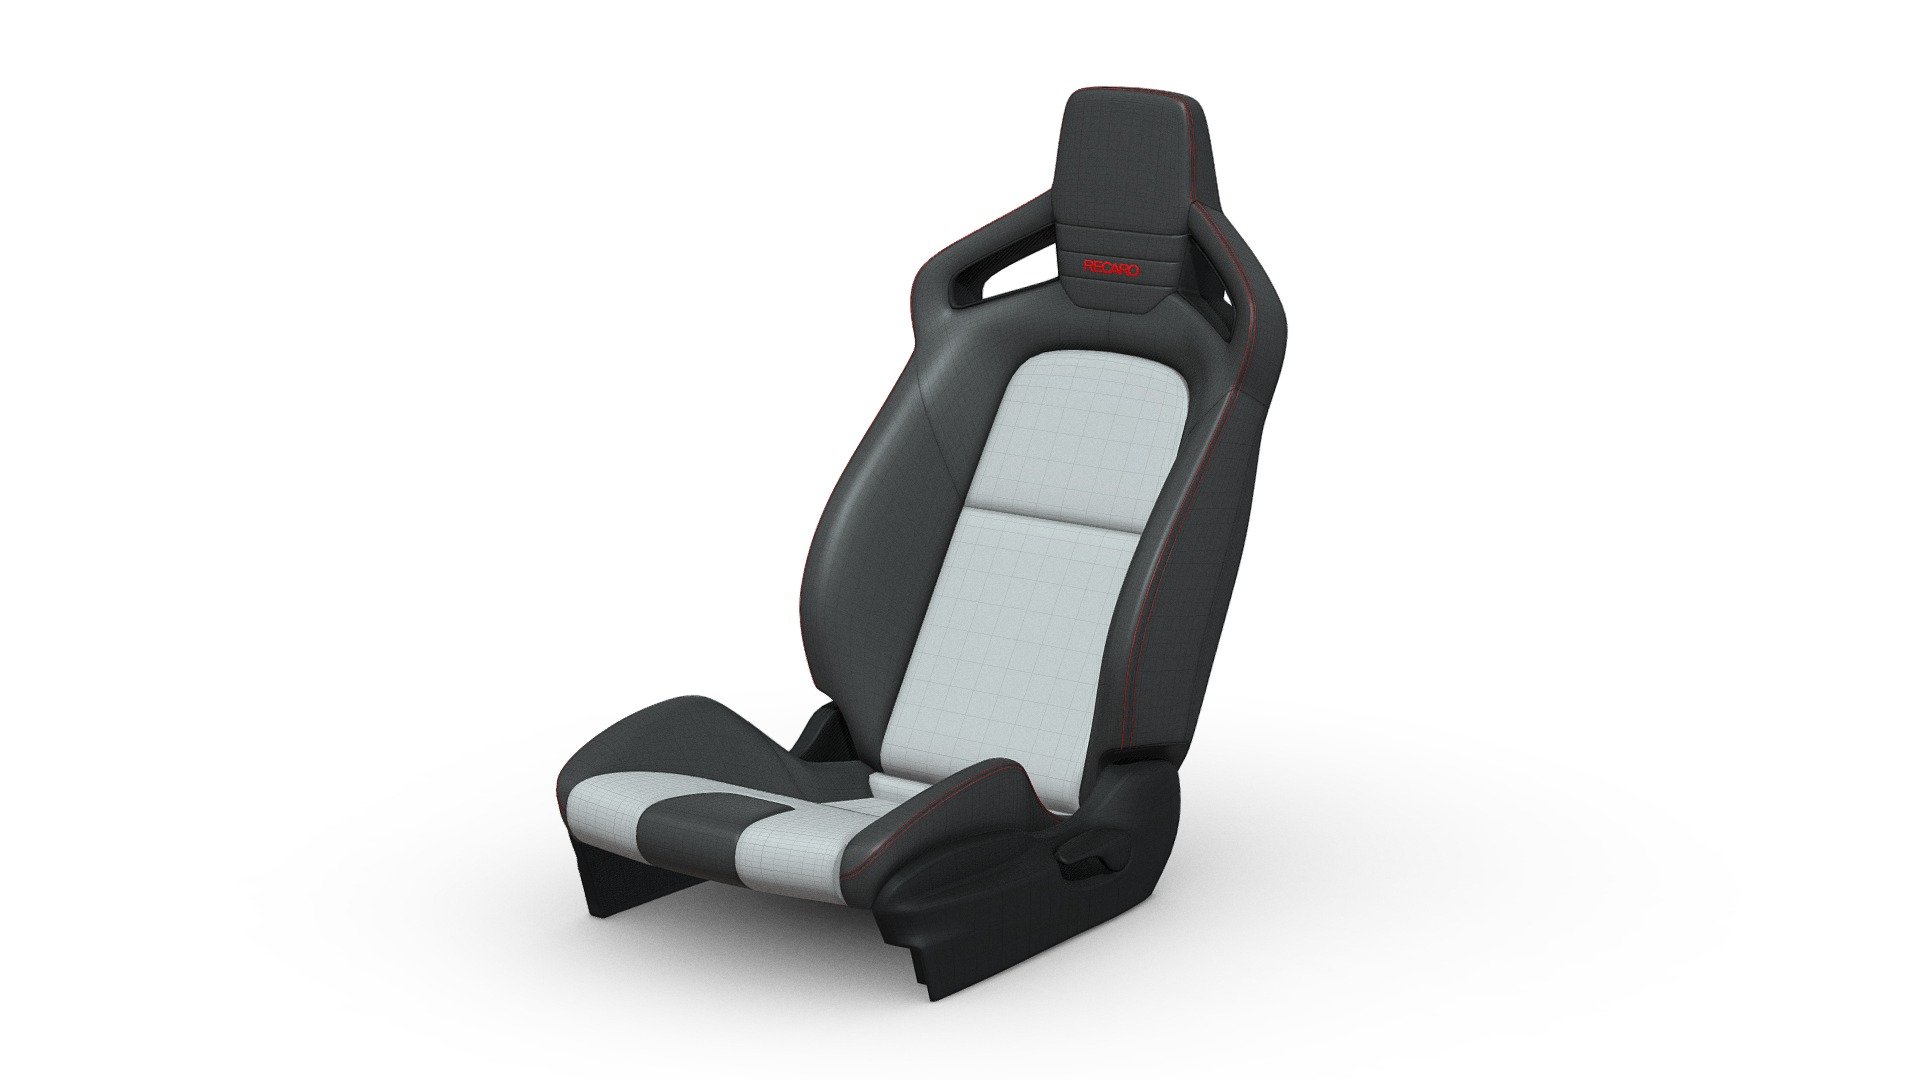 RECARO brand car seat Sports Model

Software - Blender 3.2 Render Engine - Cycles (Can be used with EEVEE also) Polygone Count - 88,467 Vertex Count - 92,138 Materials - Have Source file - Have Easy to use - Yes Game Ready - Yes Editable - Yes Ready to use - Yes PBR - Yes

Suitable for,

Racing Cars
Sport Cars
Car Modifications
Vehicle based projects
Games
Animations
Low-poly projects
Movies
Backgrounds
Assests
Spares
Just Buy and add it to your Project.

Enjoy with Your Model 3d model